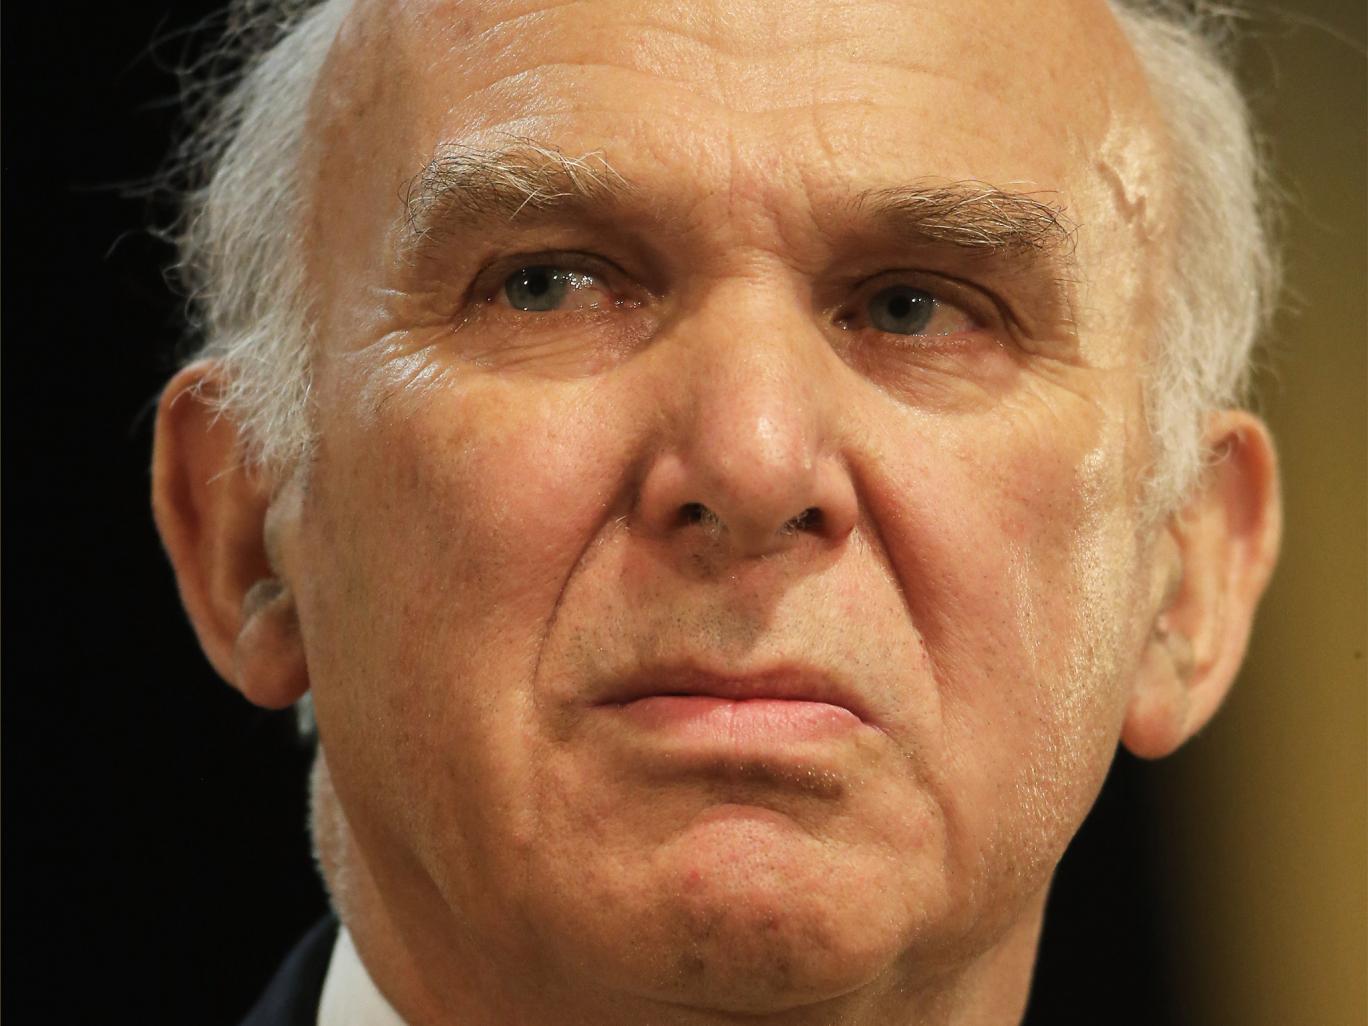 Vince Cable, the Business Secretary, said the plans being considered by Labour were “very foolish” and a “populist gesture”. (Getty)